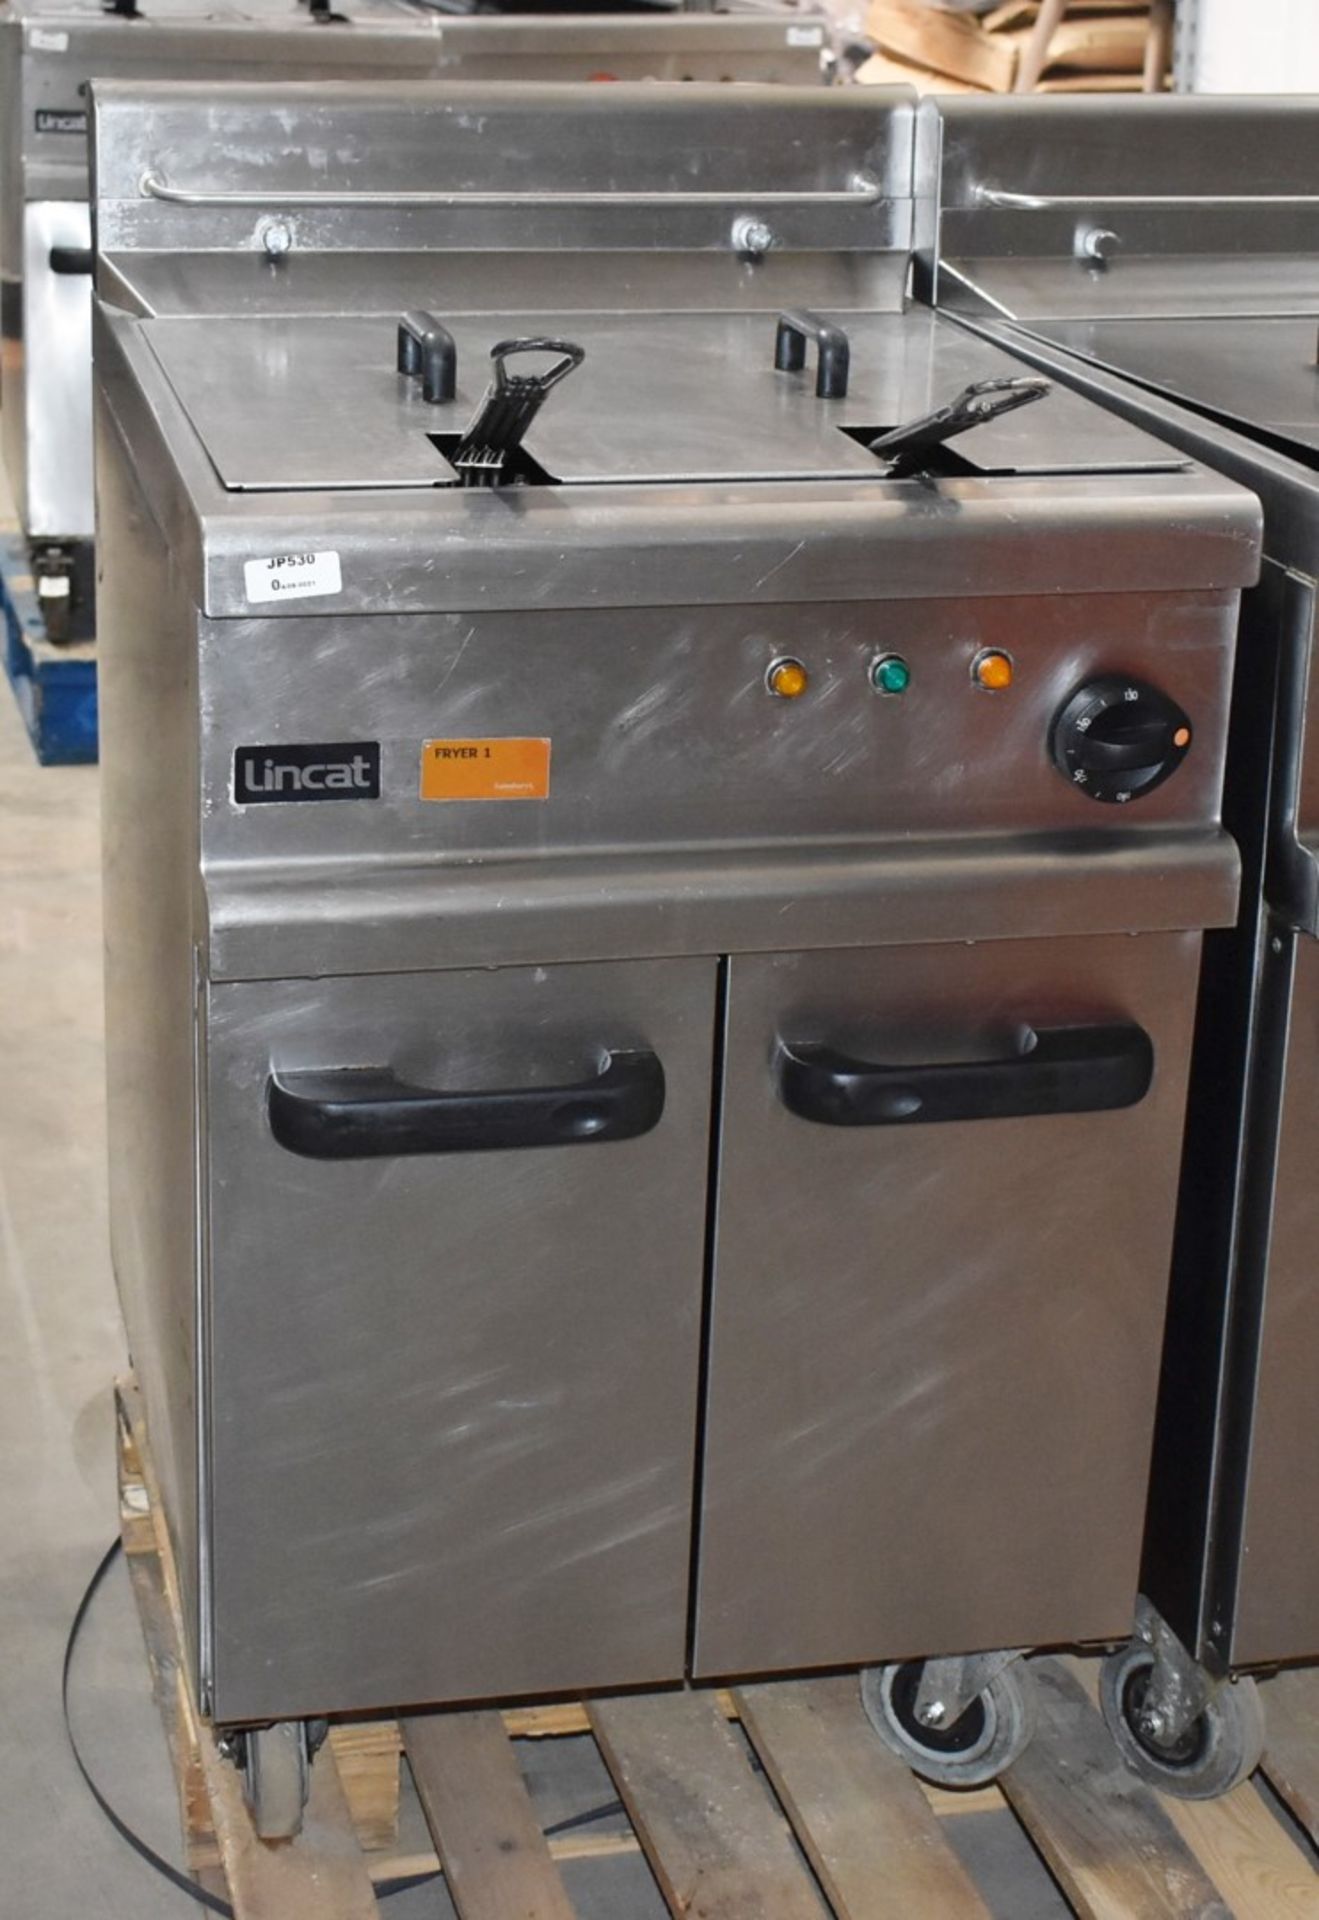 1 x Lincat Opus 700 OE7113 Single Large Tank Electric Fryer With Built In Filteration - 240V / 3PH - Image 7 of 8